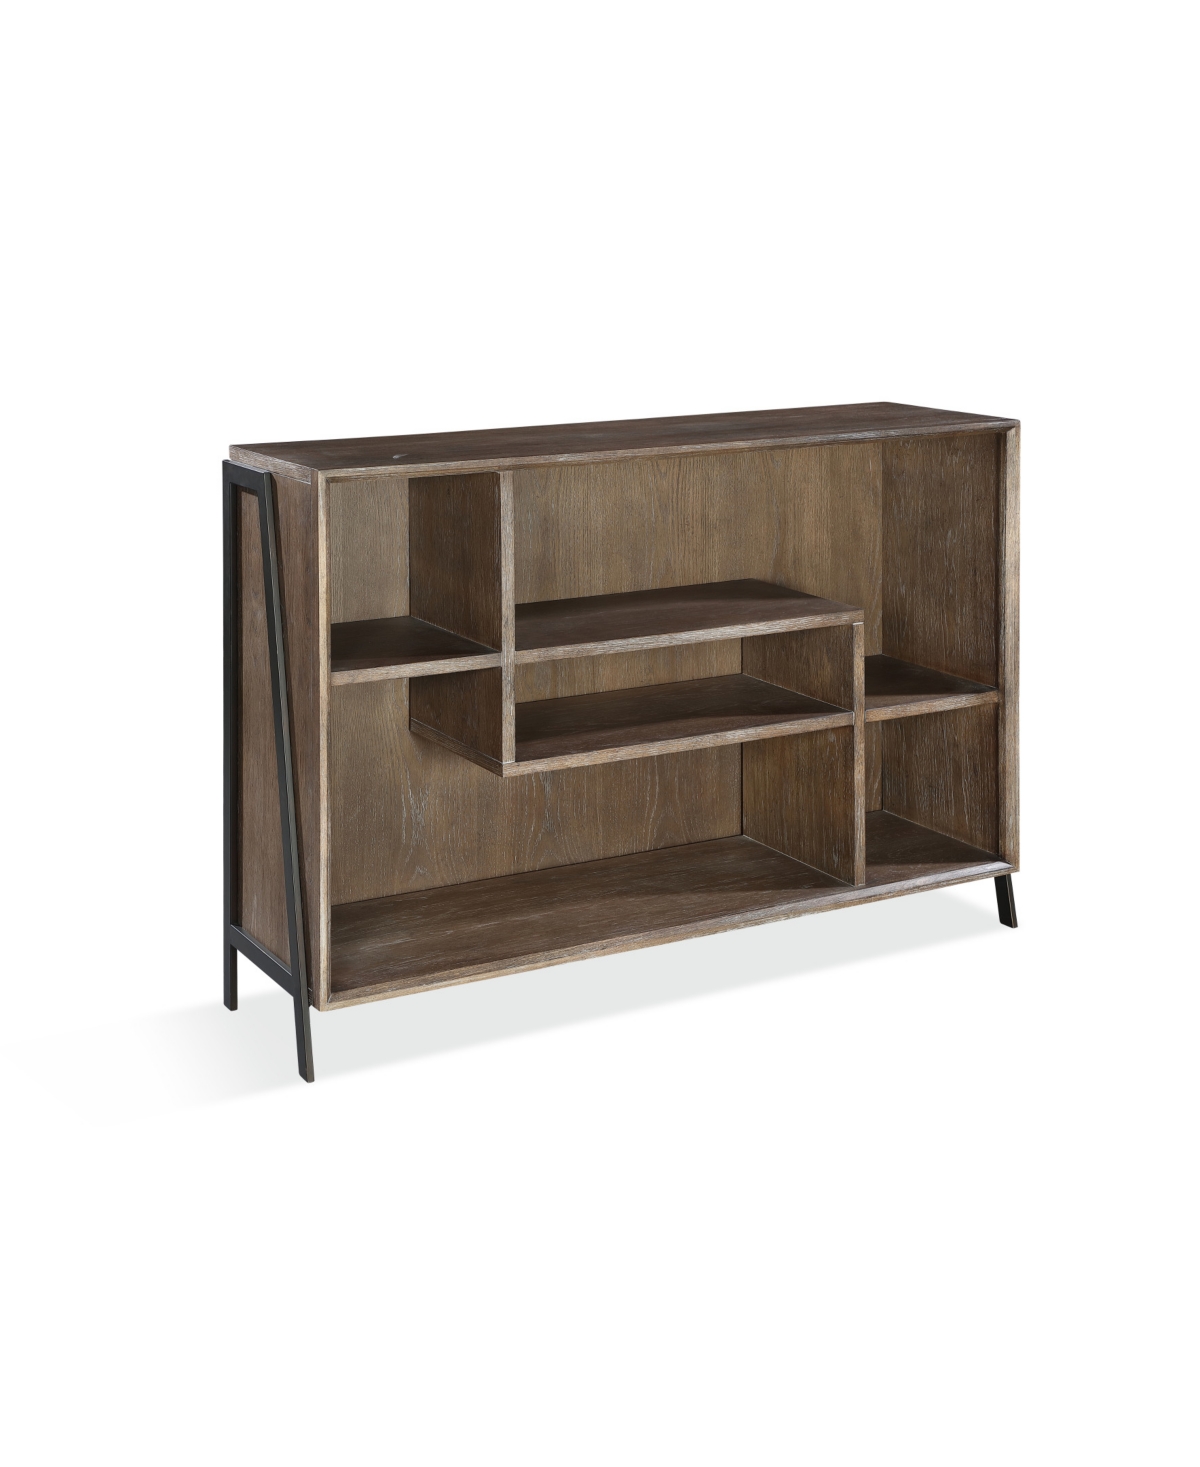 Macy's Finch 42" Wood And Metal Accent Bookcase In Buckwheat,antique Bronze